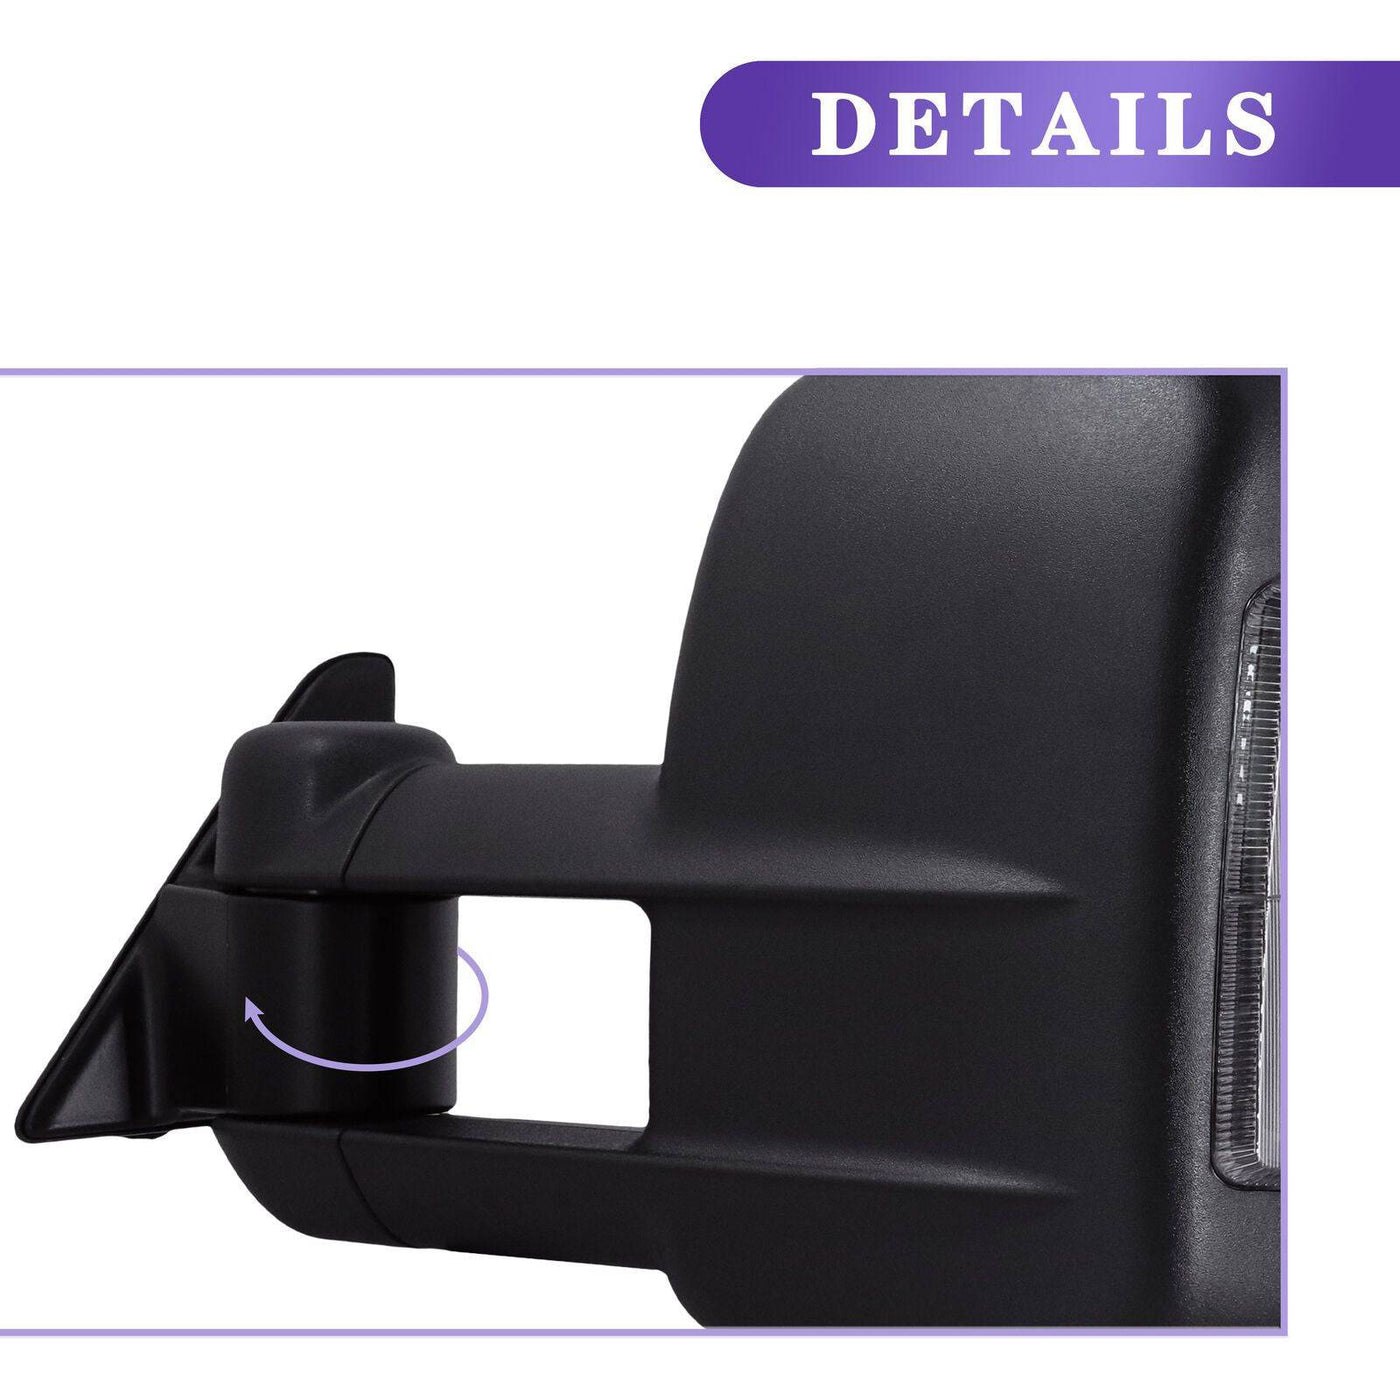 Extendable Towing Mirror Suits Toyota Land Cruiser 100 / 105 Series 1998-2007 Blinker (Online Only)